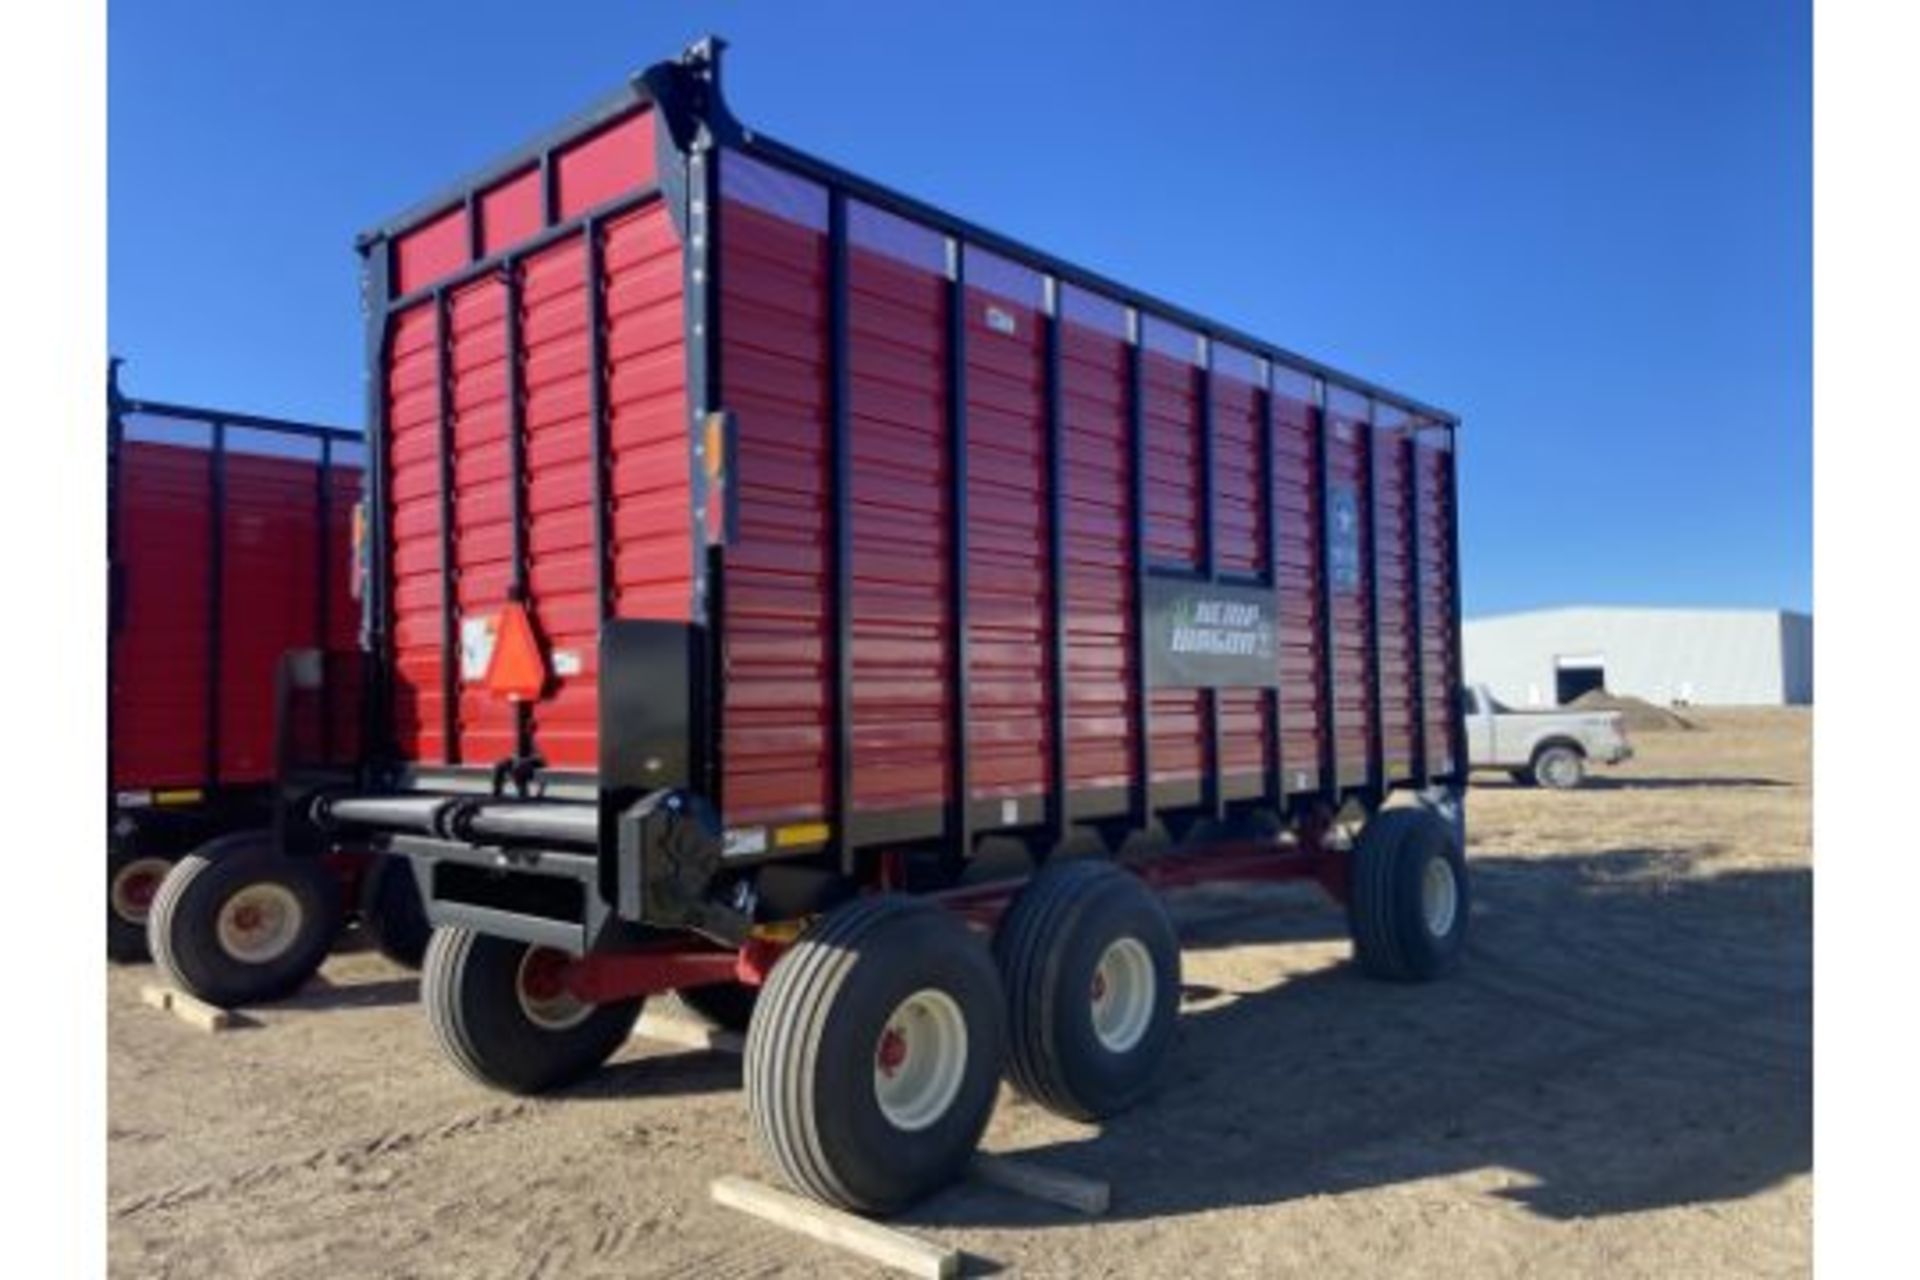 LIKE NEW Meyer Manufacturing Live Floor Rear Unload Forage Box, Serial# 1919DRX213, Rigging/ Loading